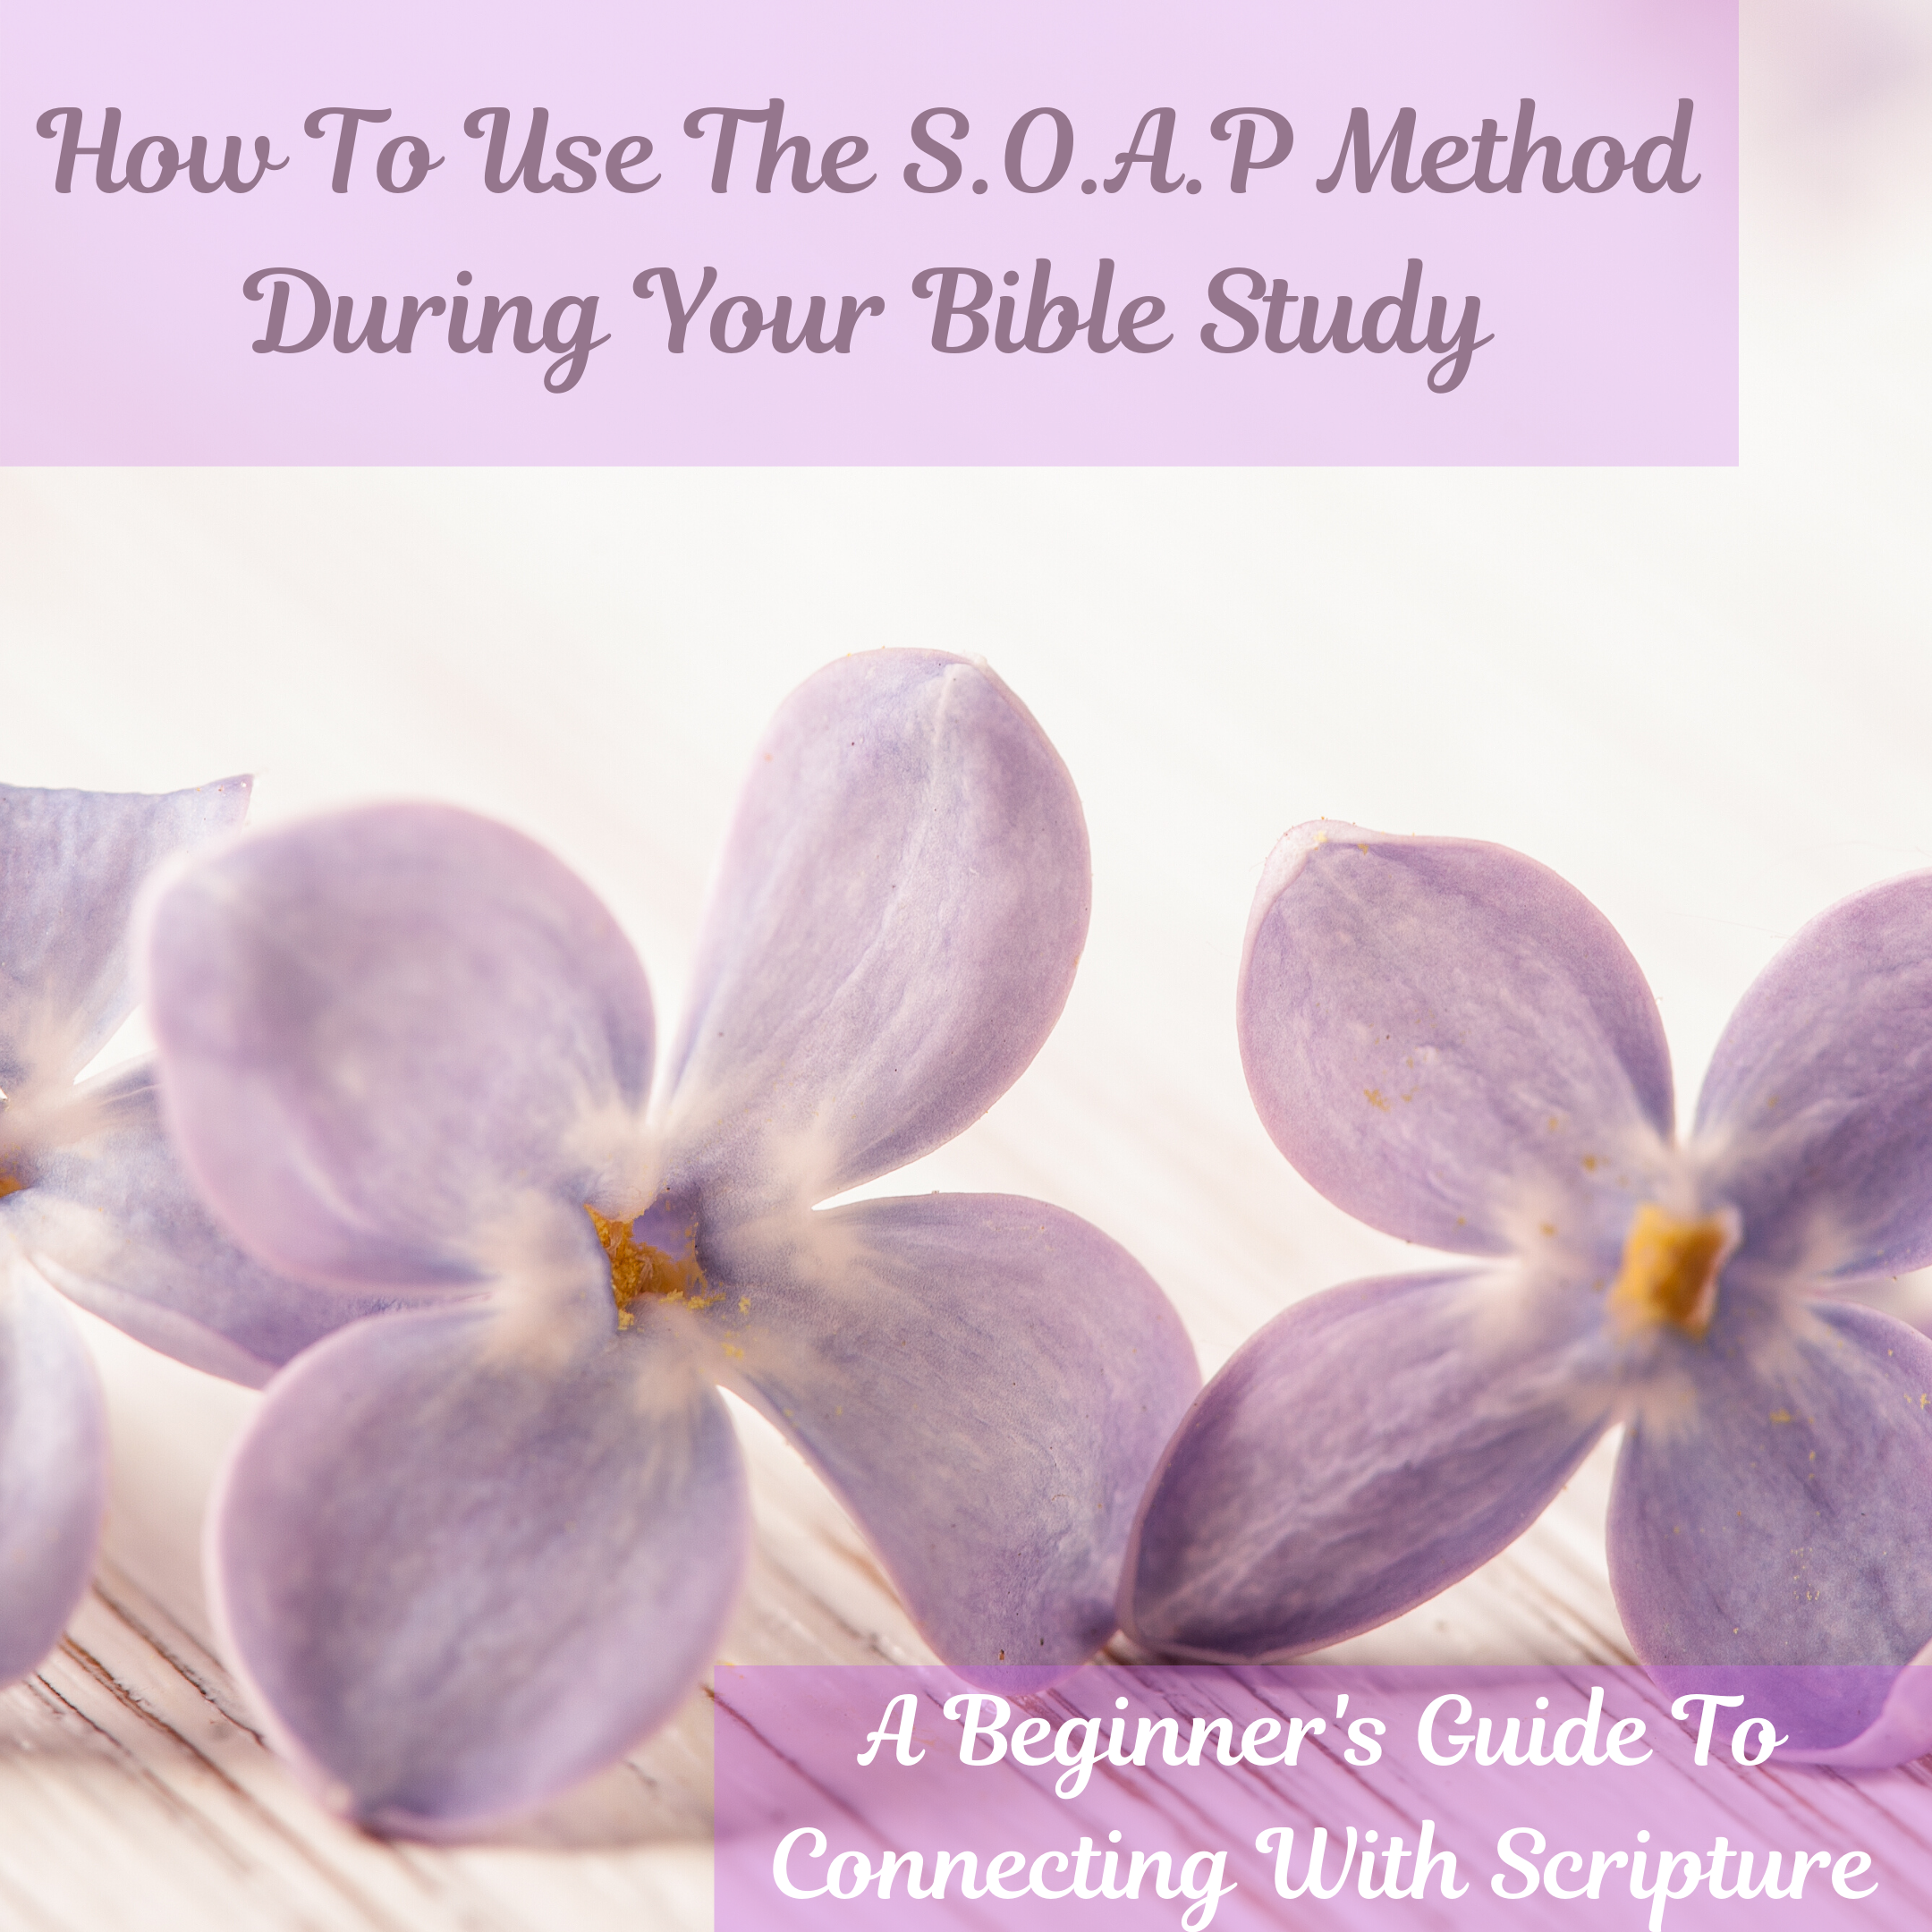 How to Use The S.O.A.P Method During Your Bible Study